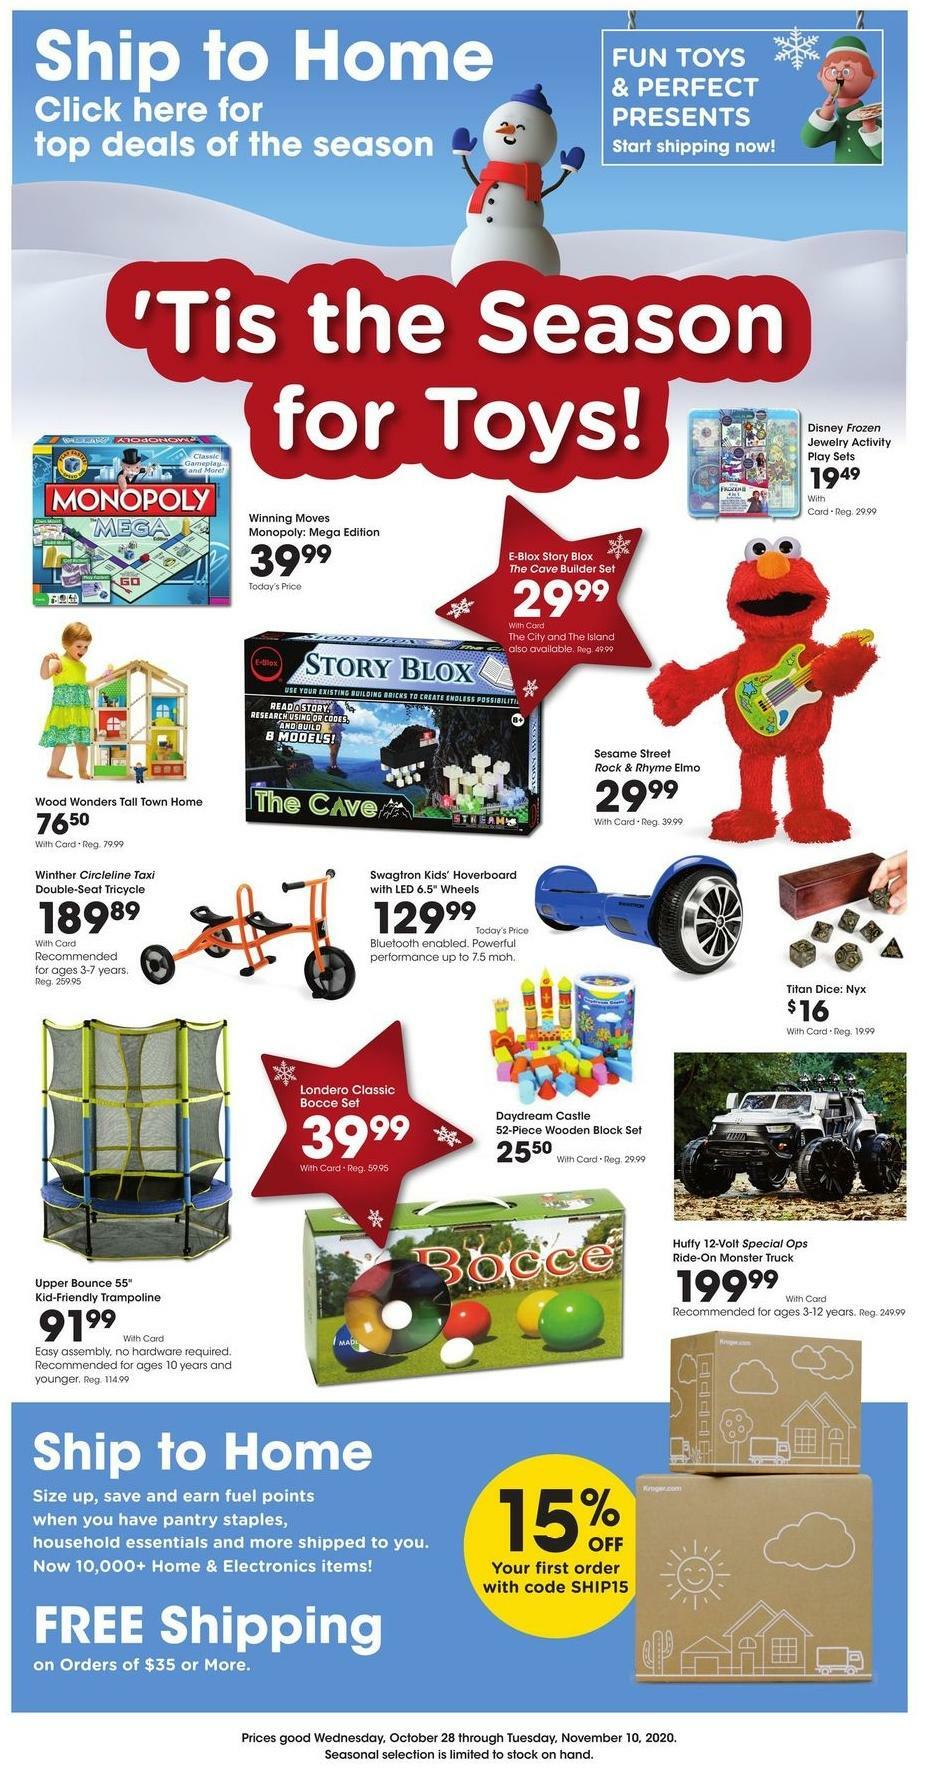 Kroger Ship to Home Weekly Ad from October 28